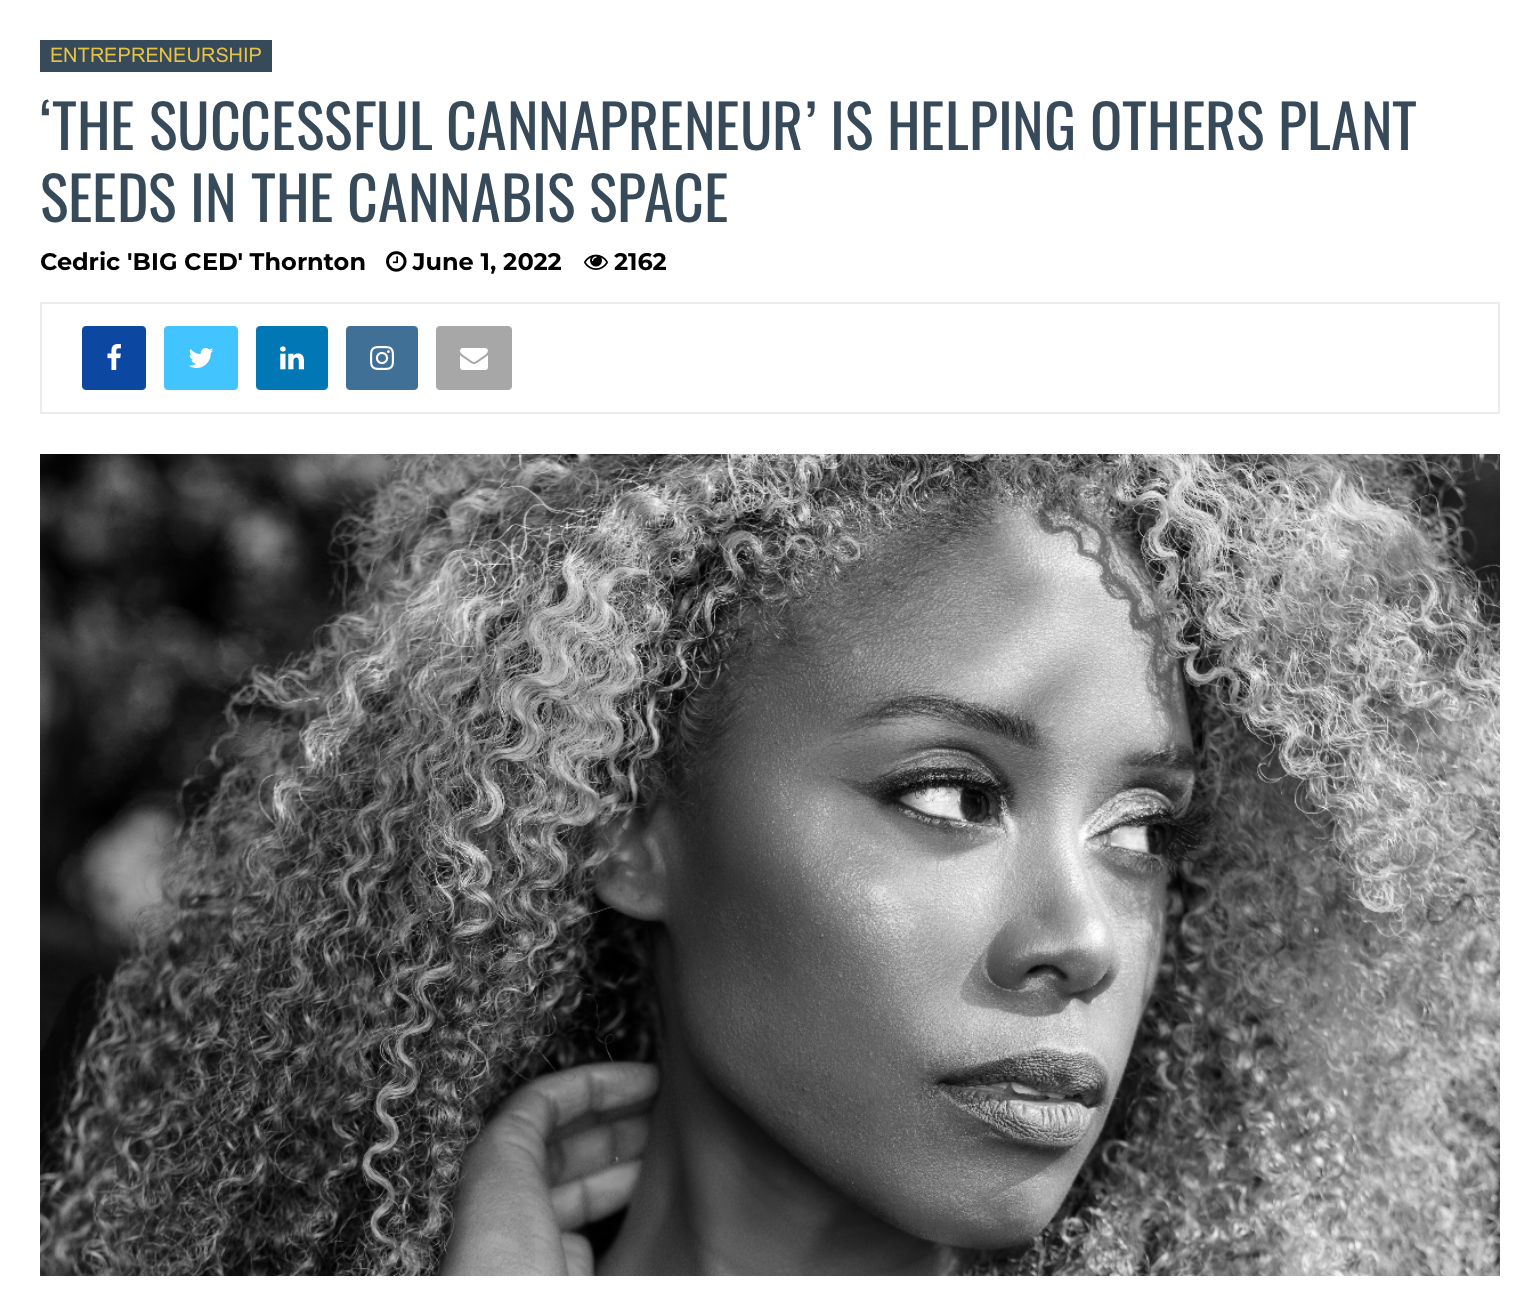 ‘THE SUCCESSFUL CANNAPRENEUR’ IS HELPING OTHERS PLANT SEEDS IN THE CANNABIS SPACE